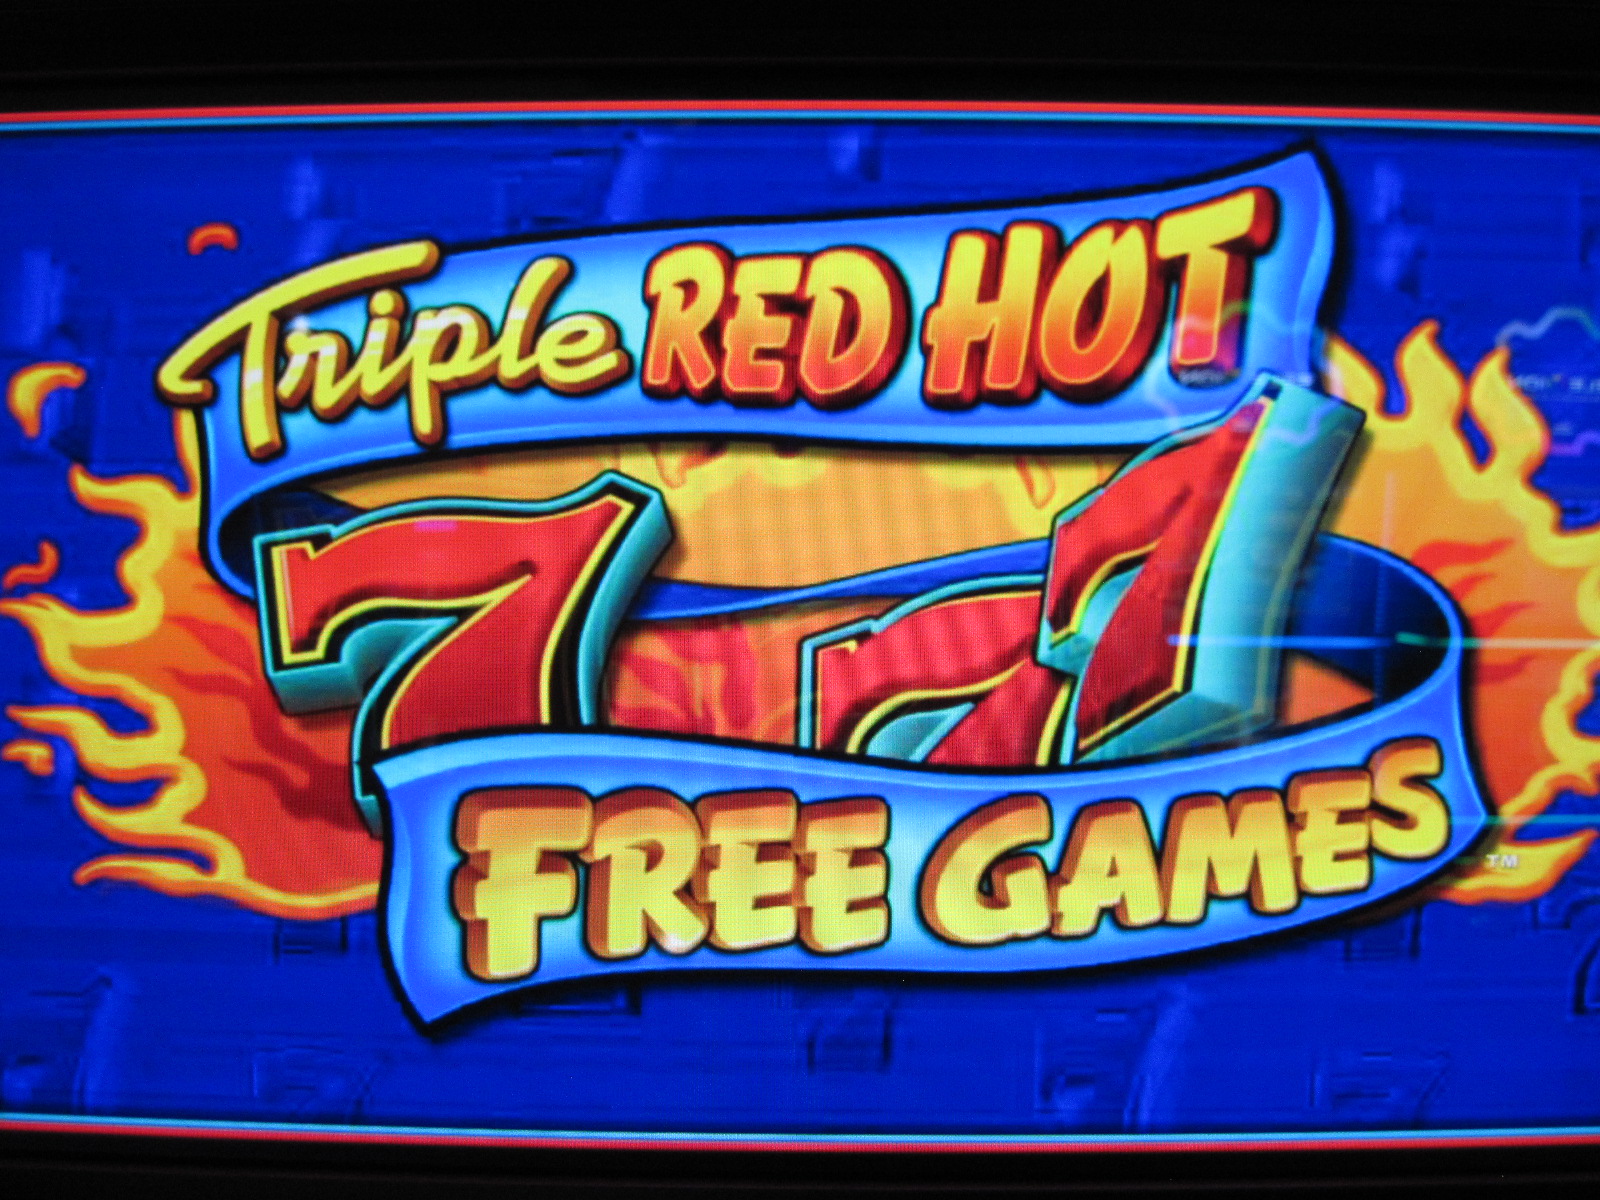 Triple Red Hot